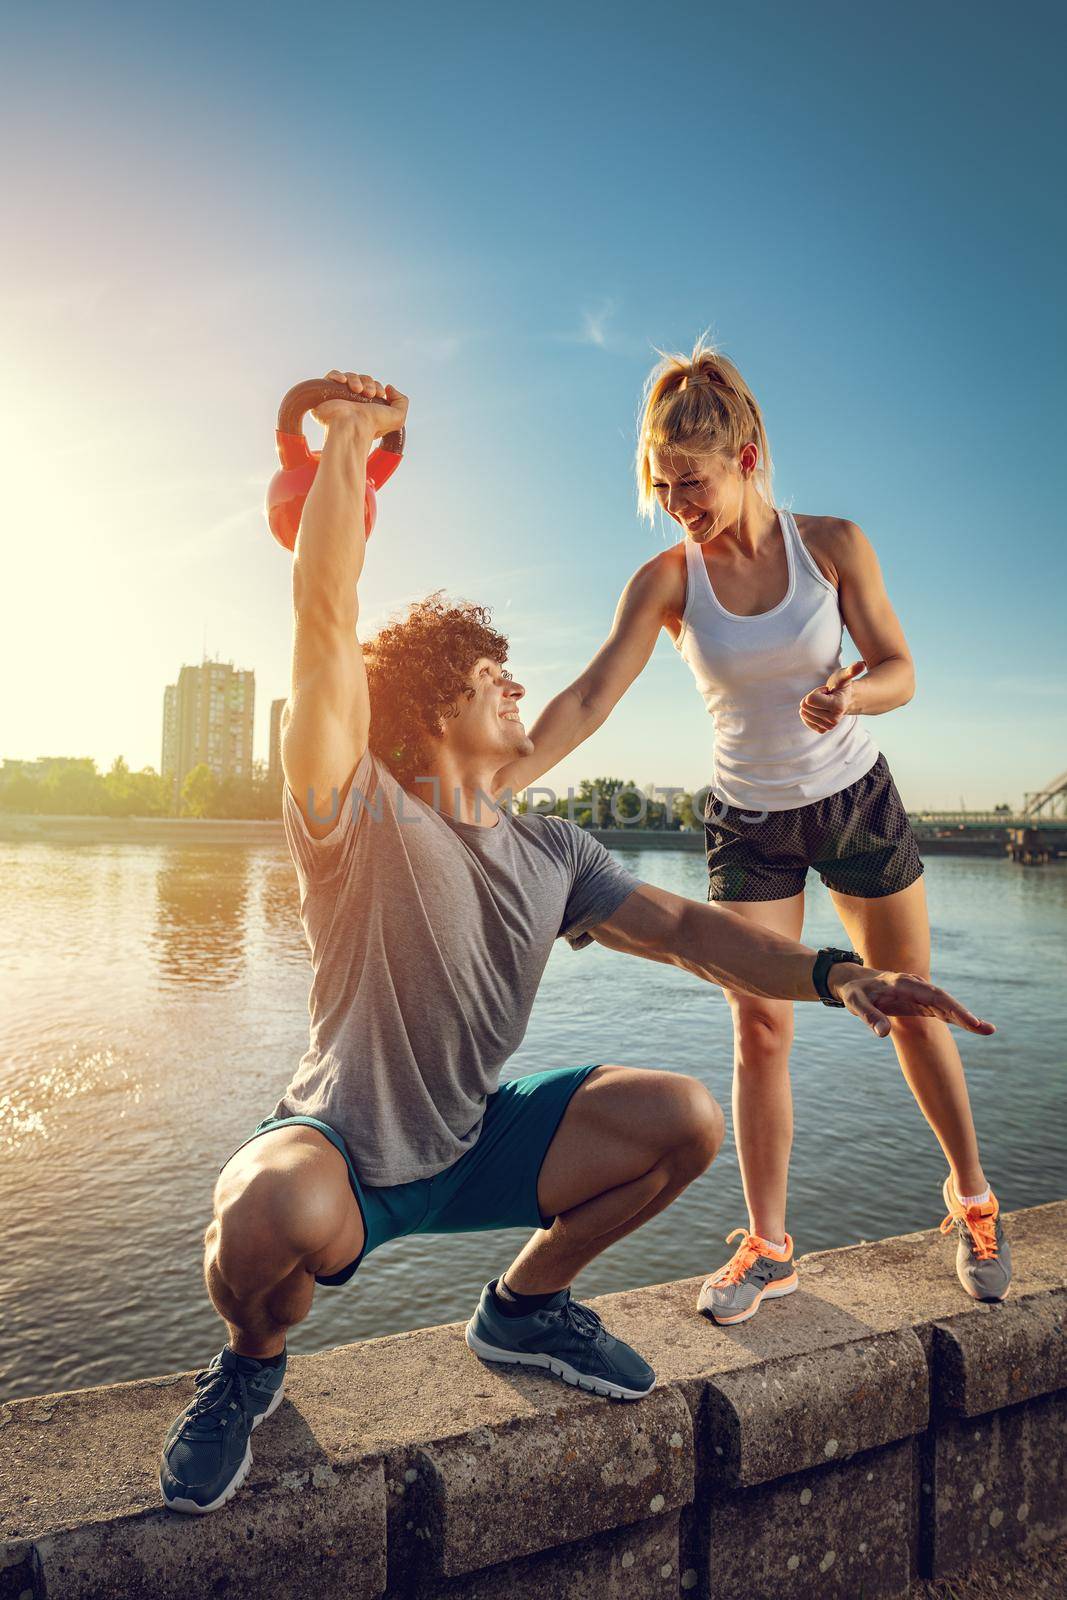 Young fitness couple doing workout with kettlebell on the wall  by the river in a sunset. The man is crouching and holding kettlebell, and the woman support him.